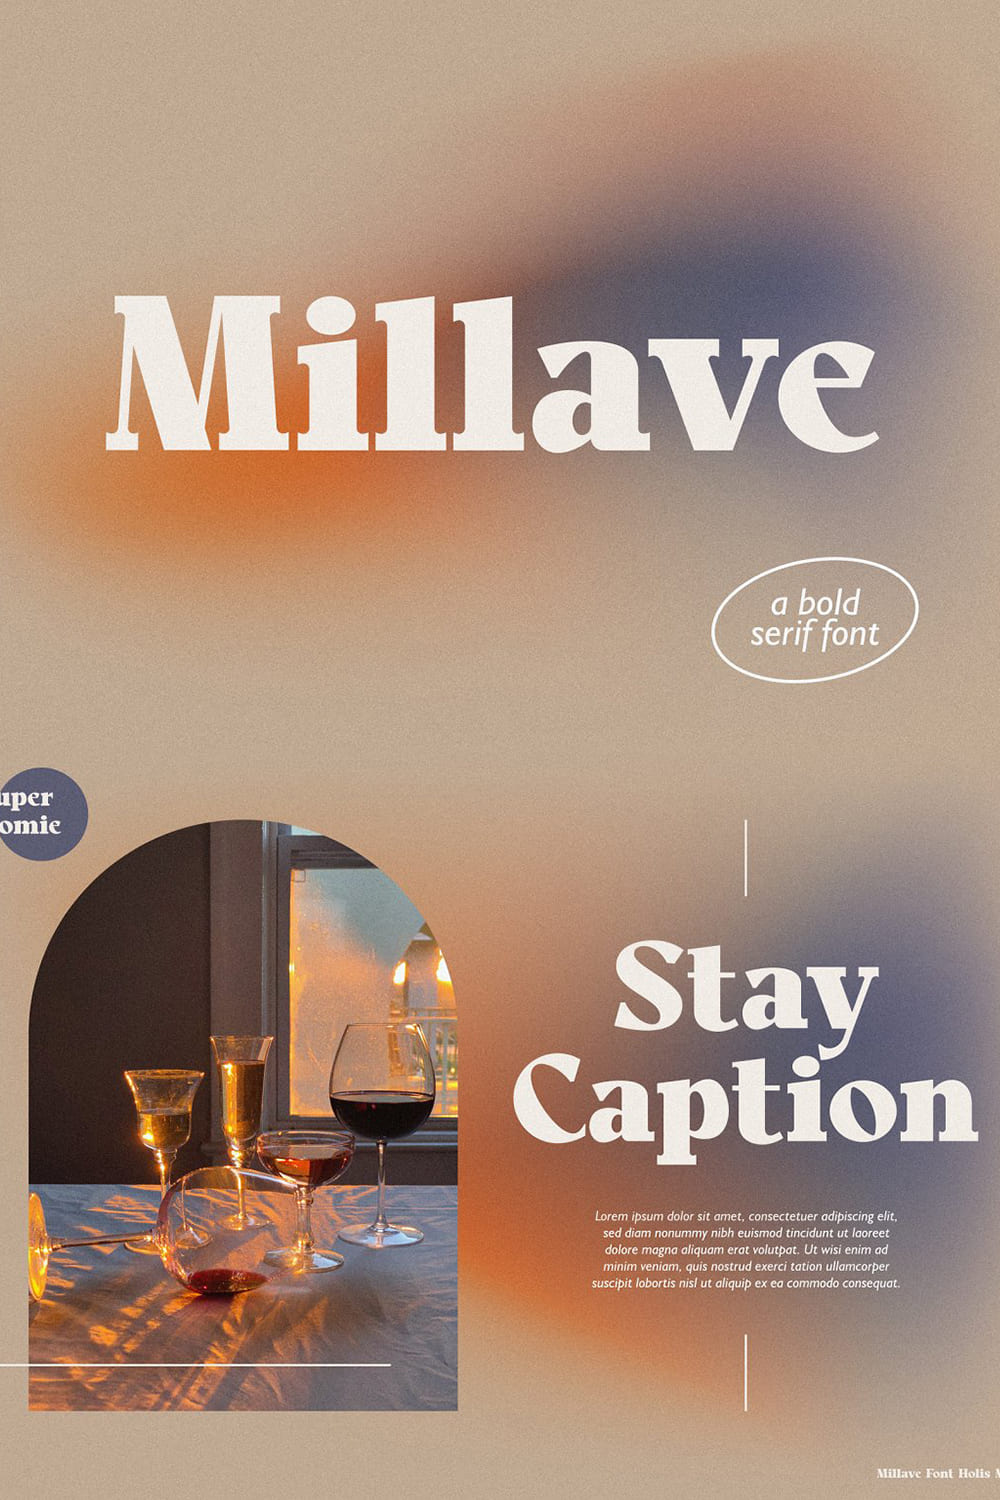 Millave Serif Preview - A Bold Serif Font "Stay Caption".